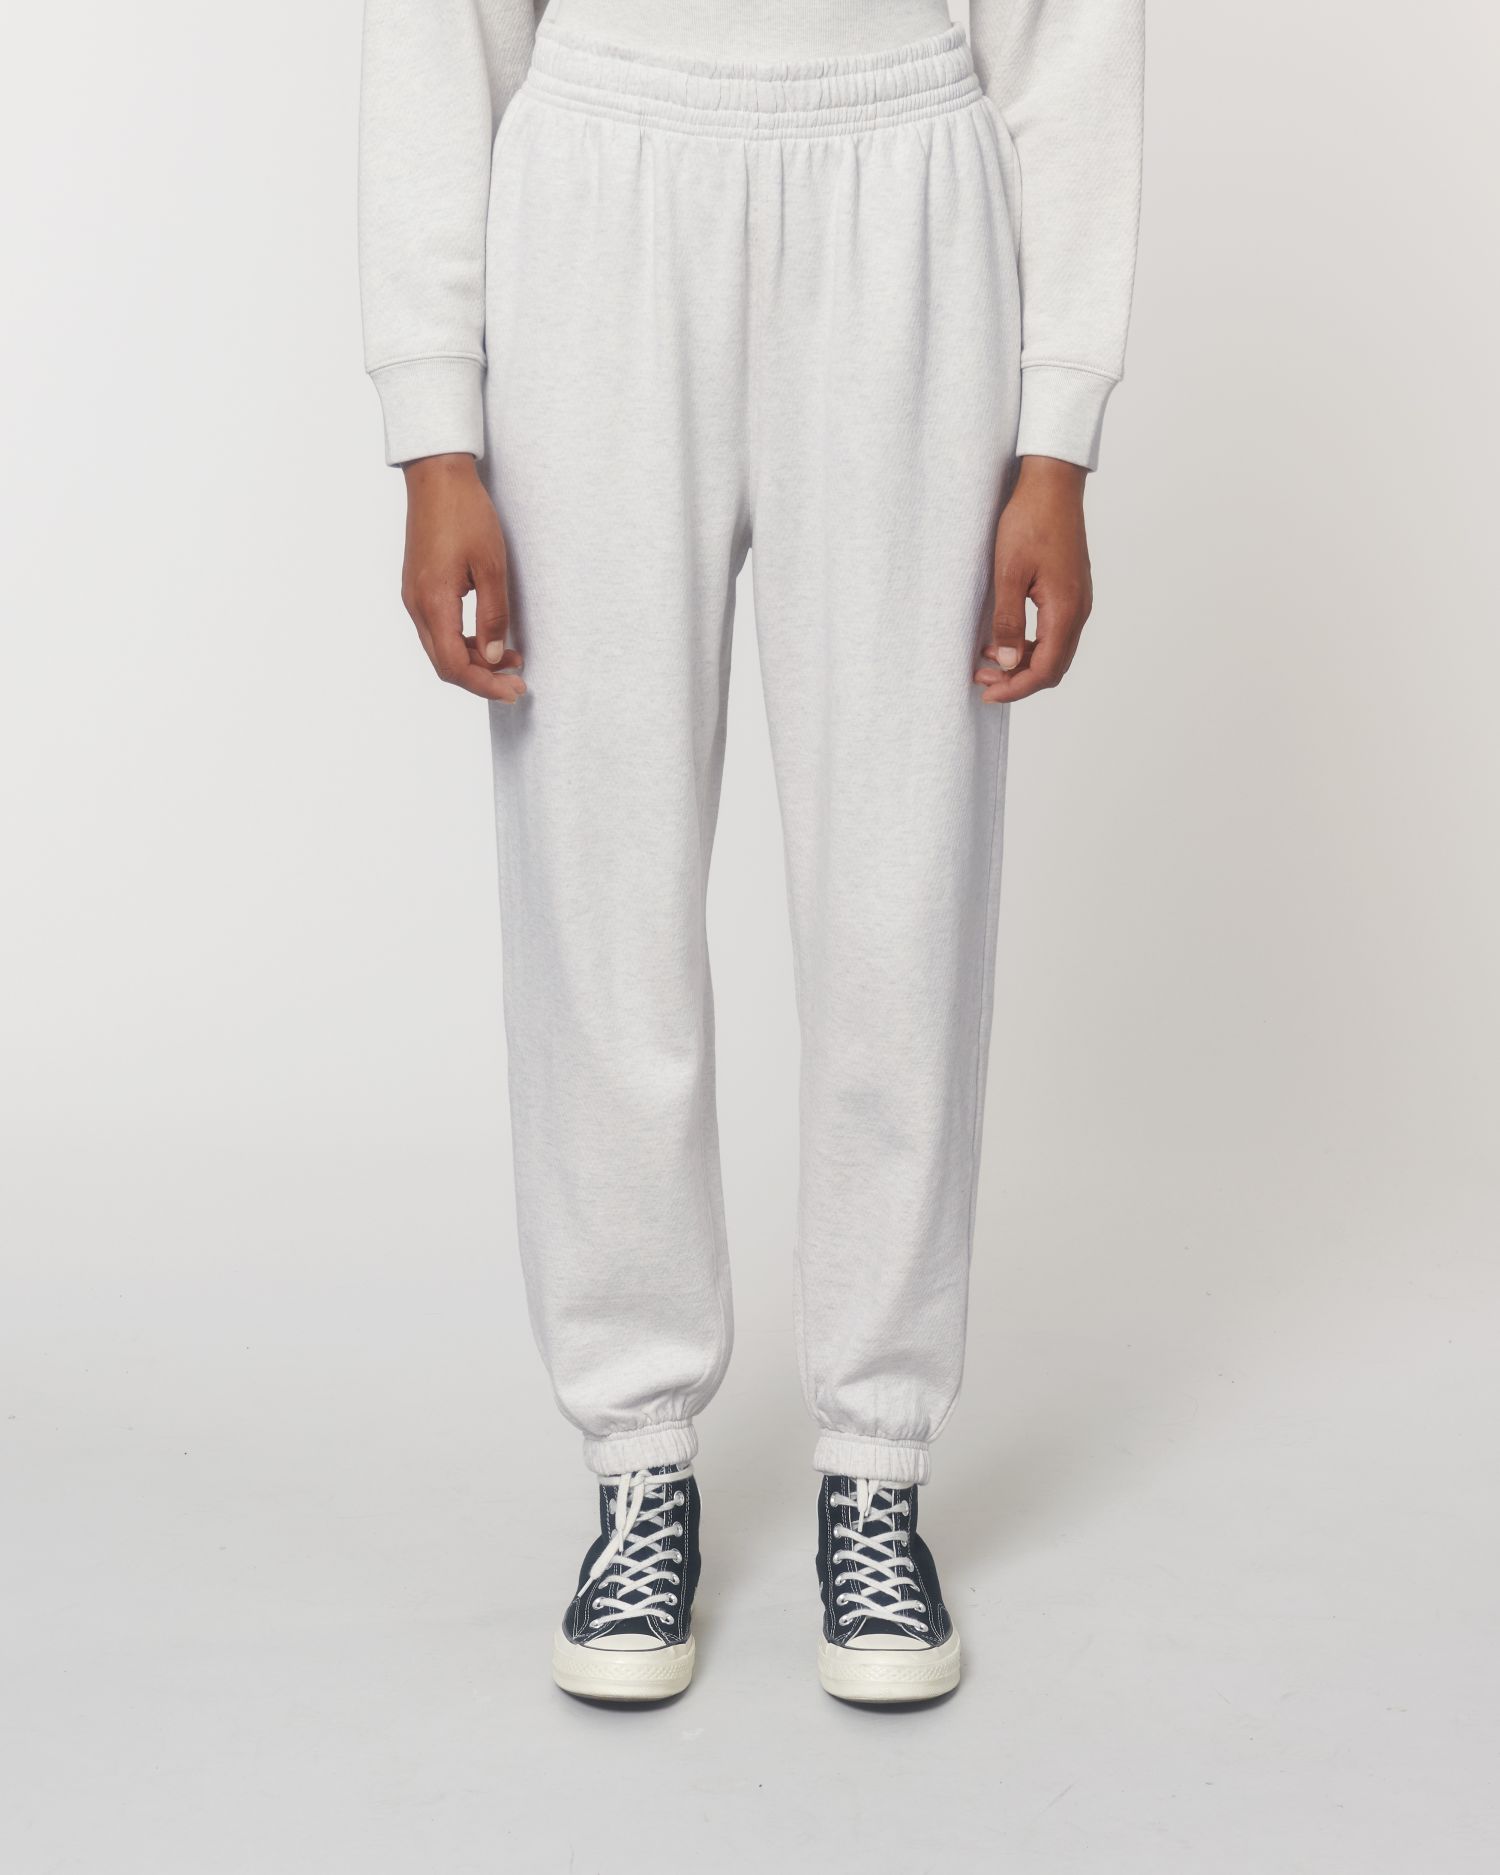 Decker Wave Terry - The unisex relaxed jogger pants wave terry from ...